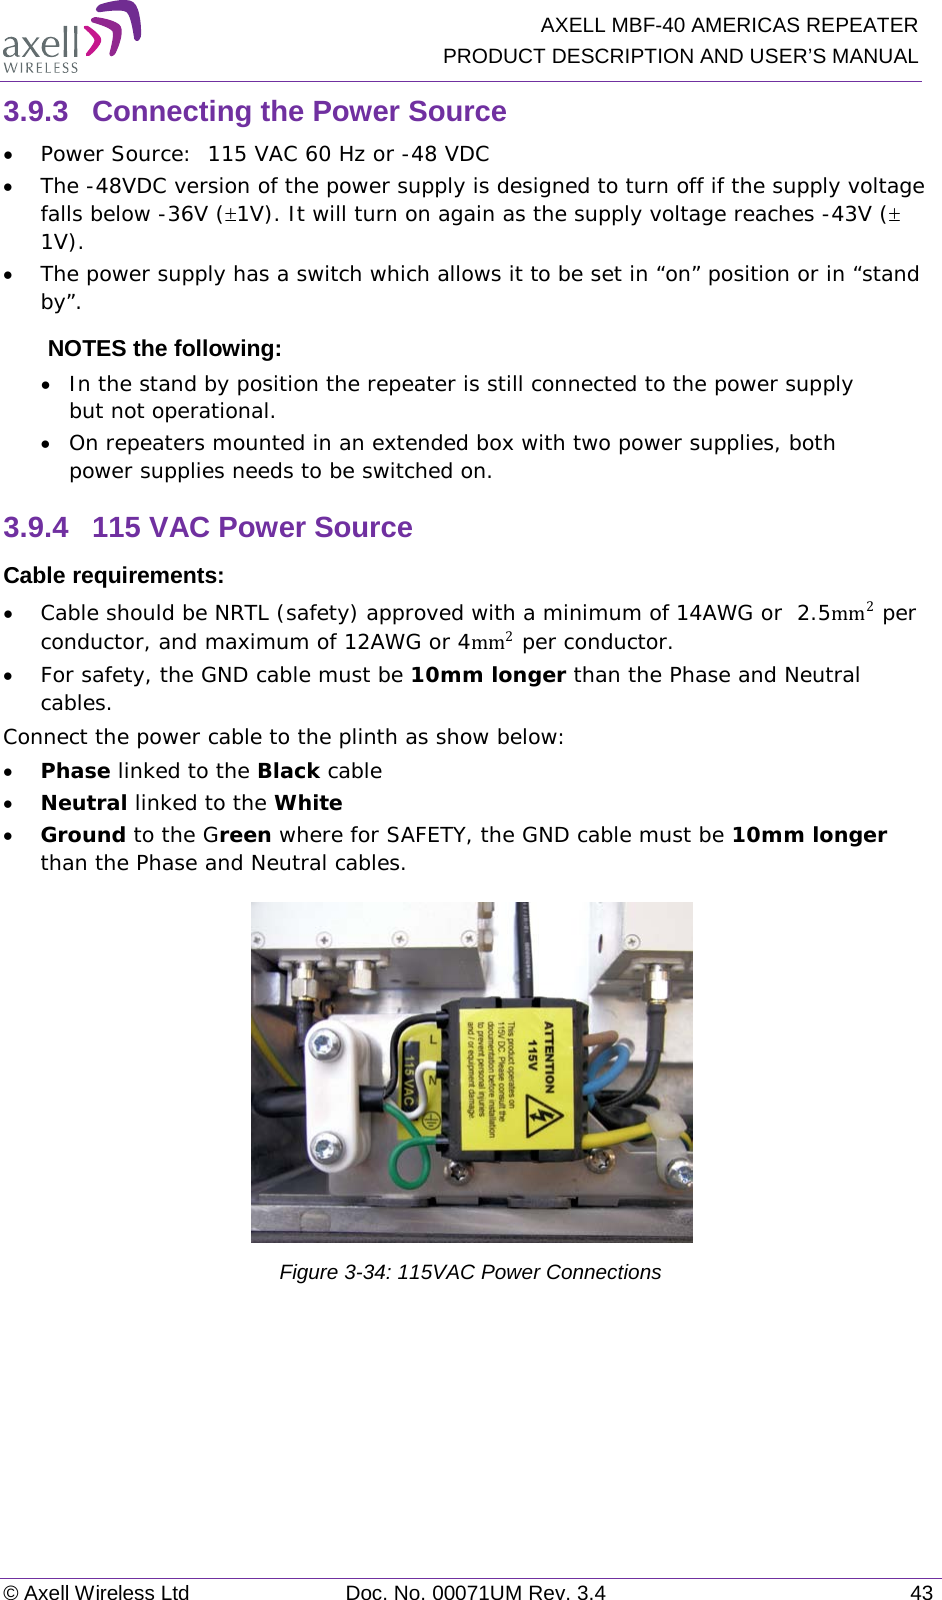   AXELL MBF-40 AMERICAS REPEATER PRODUCT DESCRIPTION AND USER’S MANUAL © Axell Wireless Ltd Doc. No. 00071UM Rev. 3.4 43 3.9.3  Connecting the Power Source • Power Source:  115 VAC 60 Hz or -48 VDC  • The -48VDC version of the power supply is designed to turn off if the supply voltage falls below -36V (±1V). It will turn on again as the supply voltage reaches -43V (± 1V).  • The power supply has a switch which allows it to be set in “on” position or in “stand by”. NOTES the following:  • In the stand by position the repeater is still connected to the power supply but not operational. • On repeaters mounted in an extended box with two power supplies, both power supplies needs to be switched on. 3.9.4  115 VAC Power Source Cable requirements:  • Cable should be NRTL (safety) approved with a minimum of 14AWG or  2.5mm2 per conductor, and maximum of 12AWG or 4mm2 per conductor. • For safety, the GND cable must be 10mm longer than the Phase and Neutral cables. Connect the power cable to the plinth as show below: • Phase linked to the Black cable • Neutral linked to the White • Ground to the Green where for SAFETY, the GND cable must be 10mm longer than the Phase and Neutral cables.  Figure  3-34: 115VAC Power Connections    